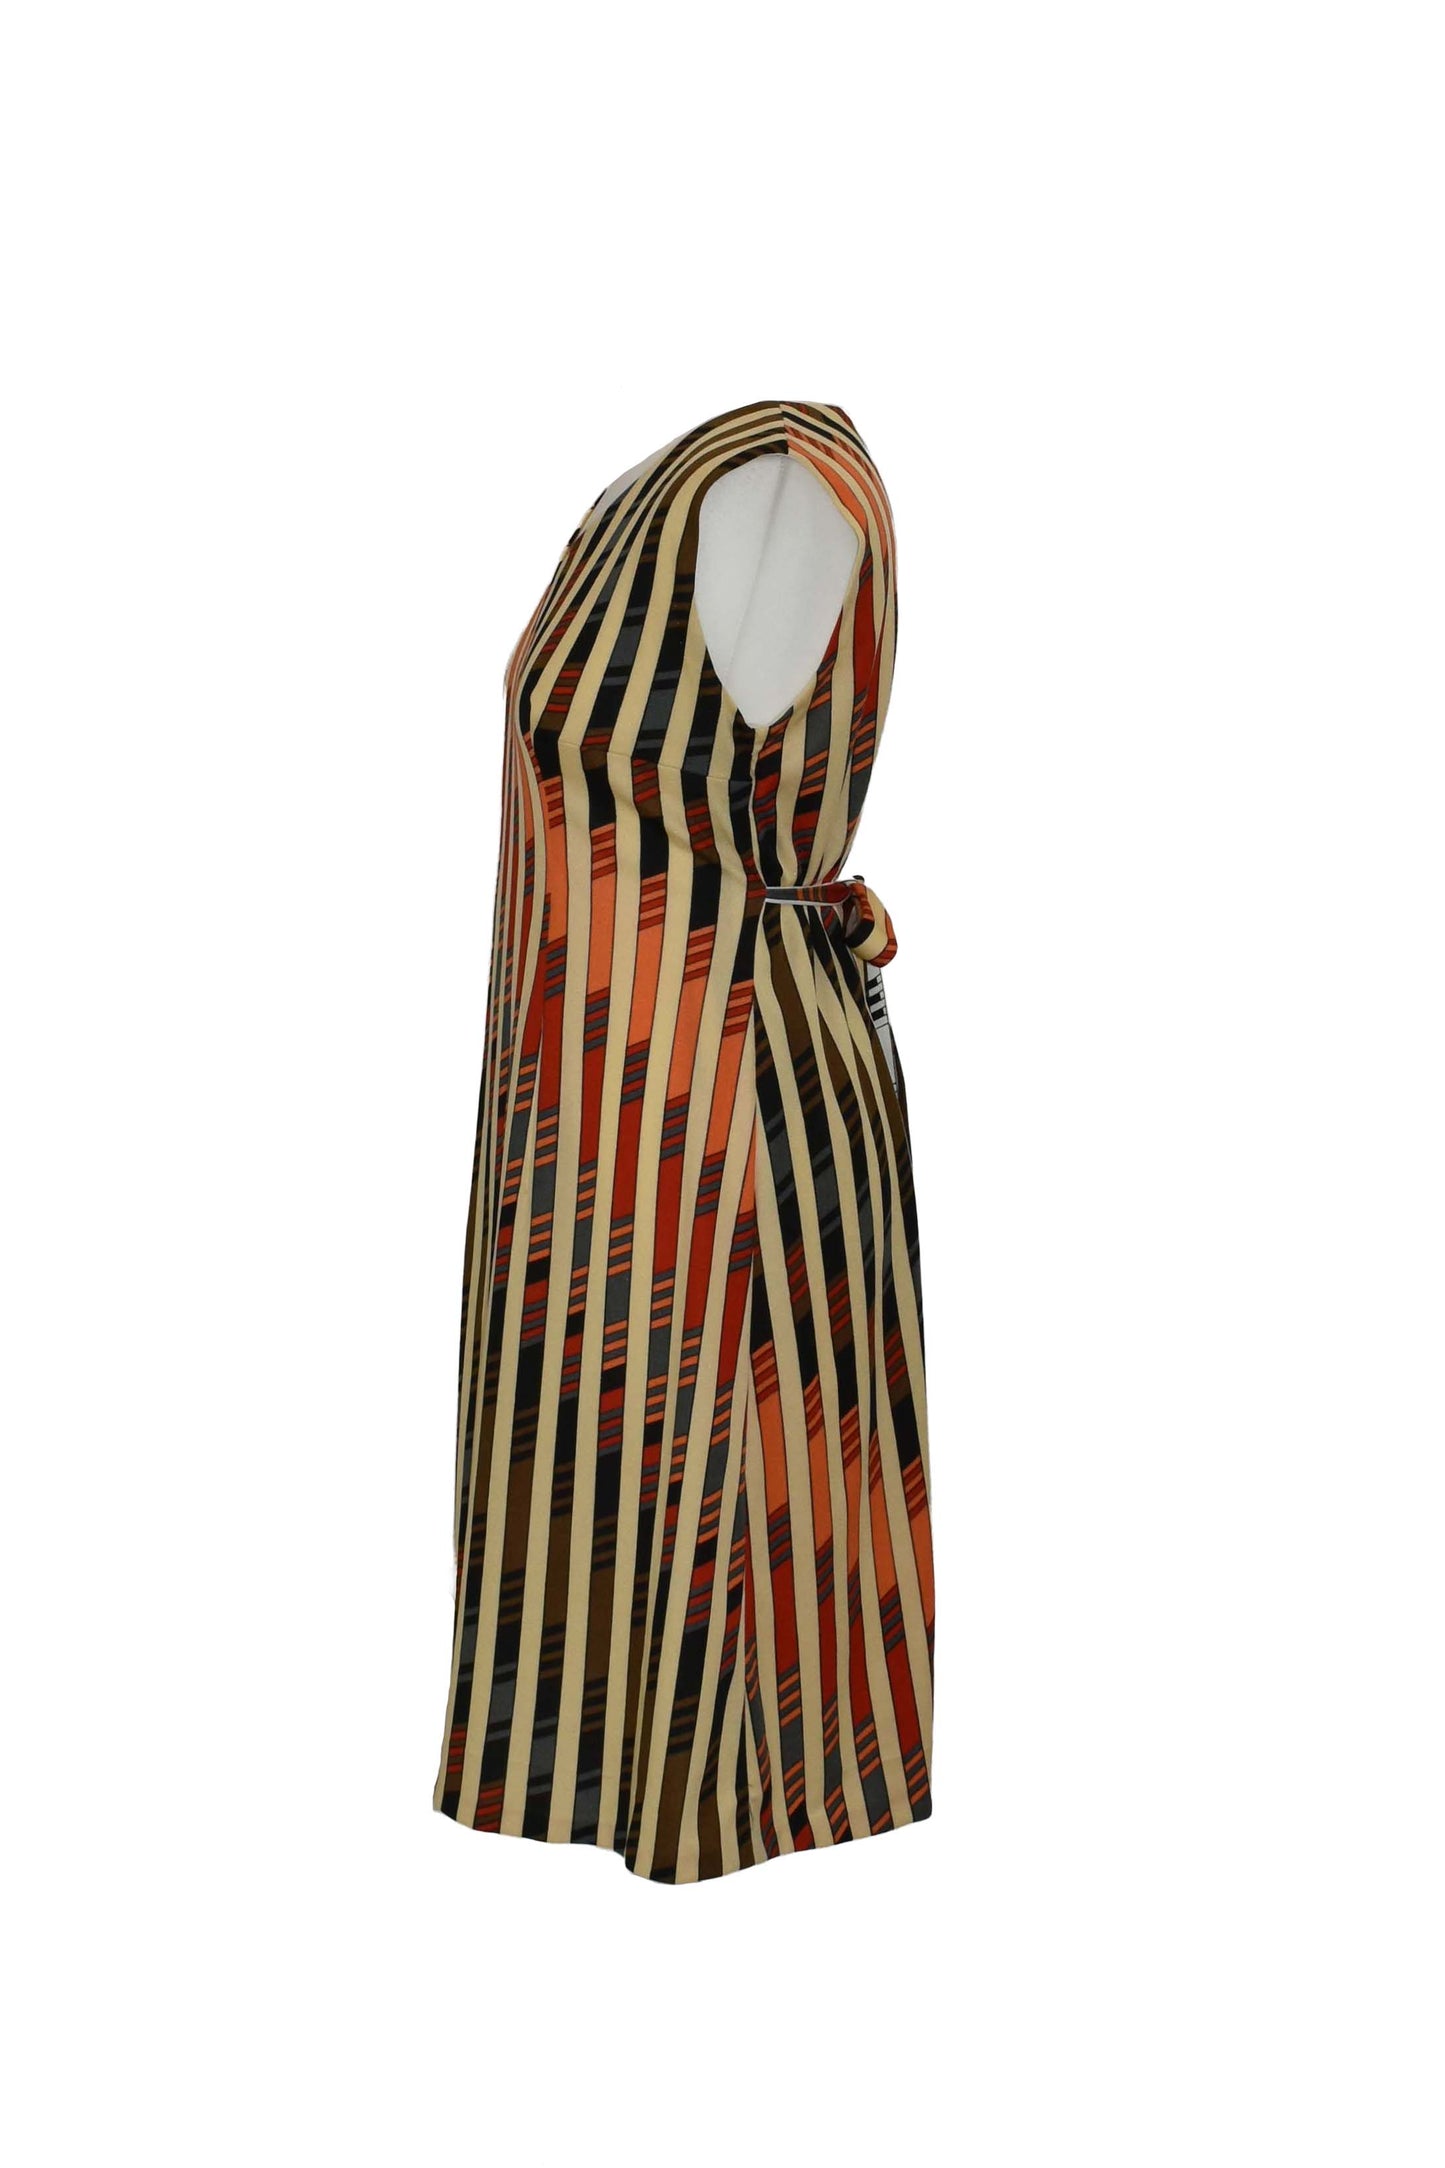 1980’s Geometric Graphic Print Belted Shift Dress | Vintage